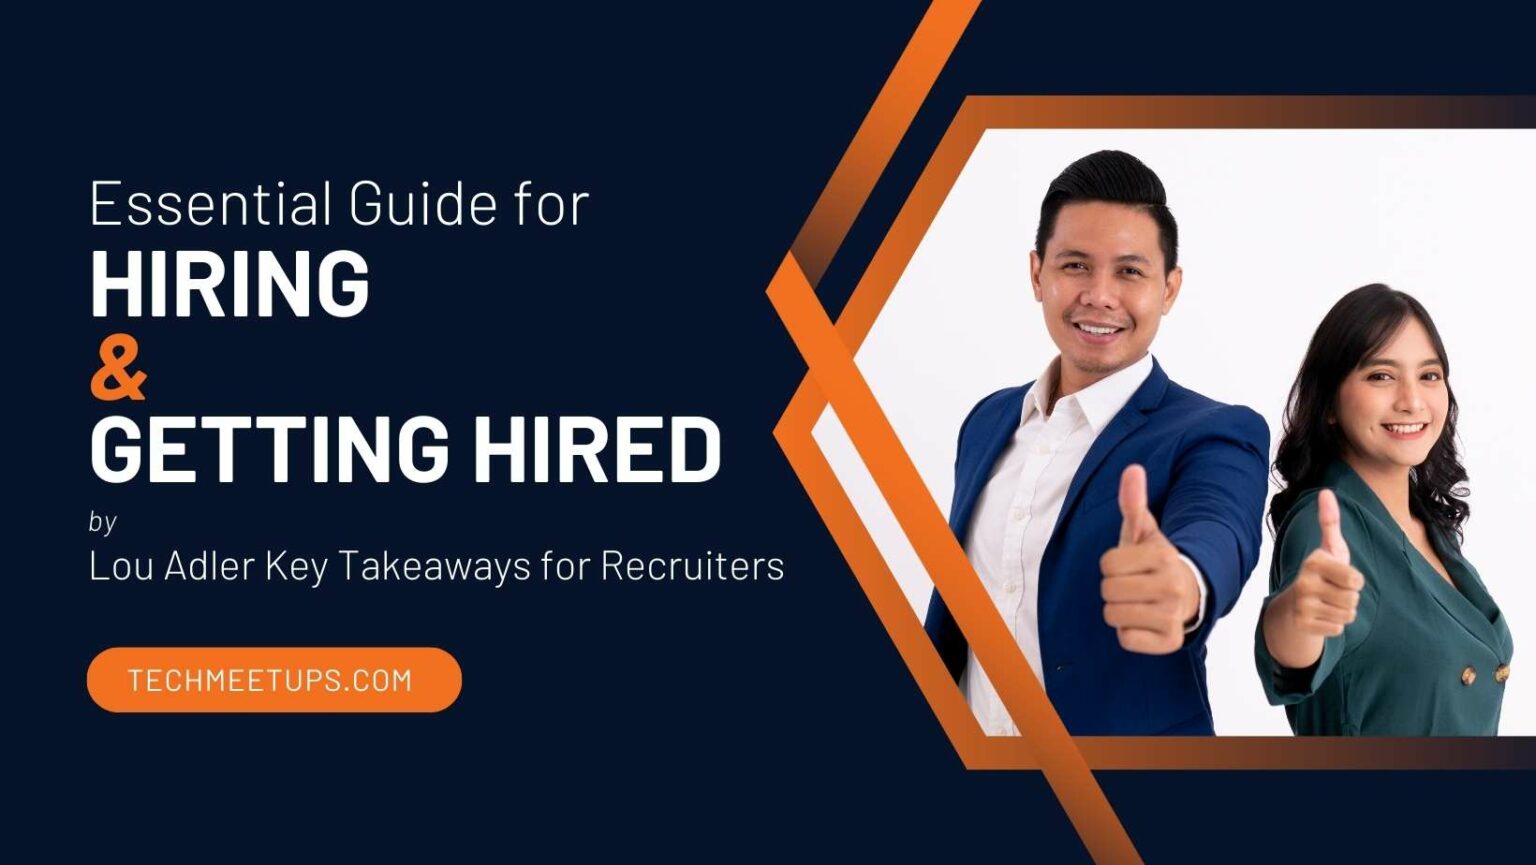 <div>“The Essential Guide for Hiring & Getting Hired” by Lou Adler Key Takeaways for Recruiters</div>